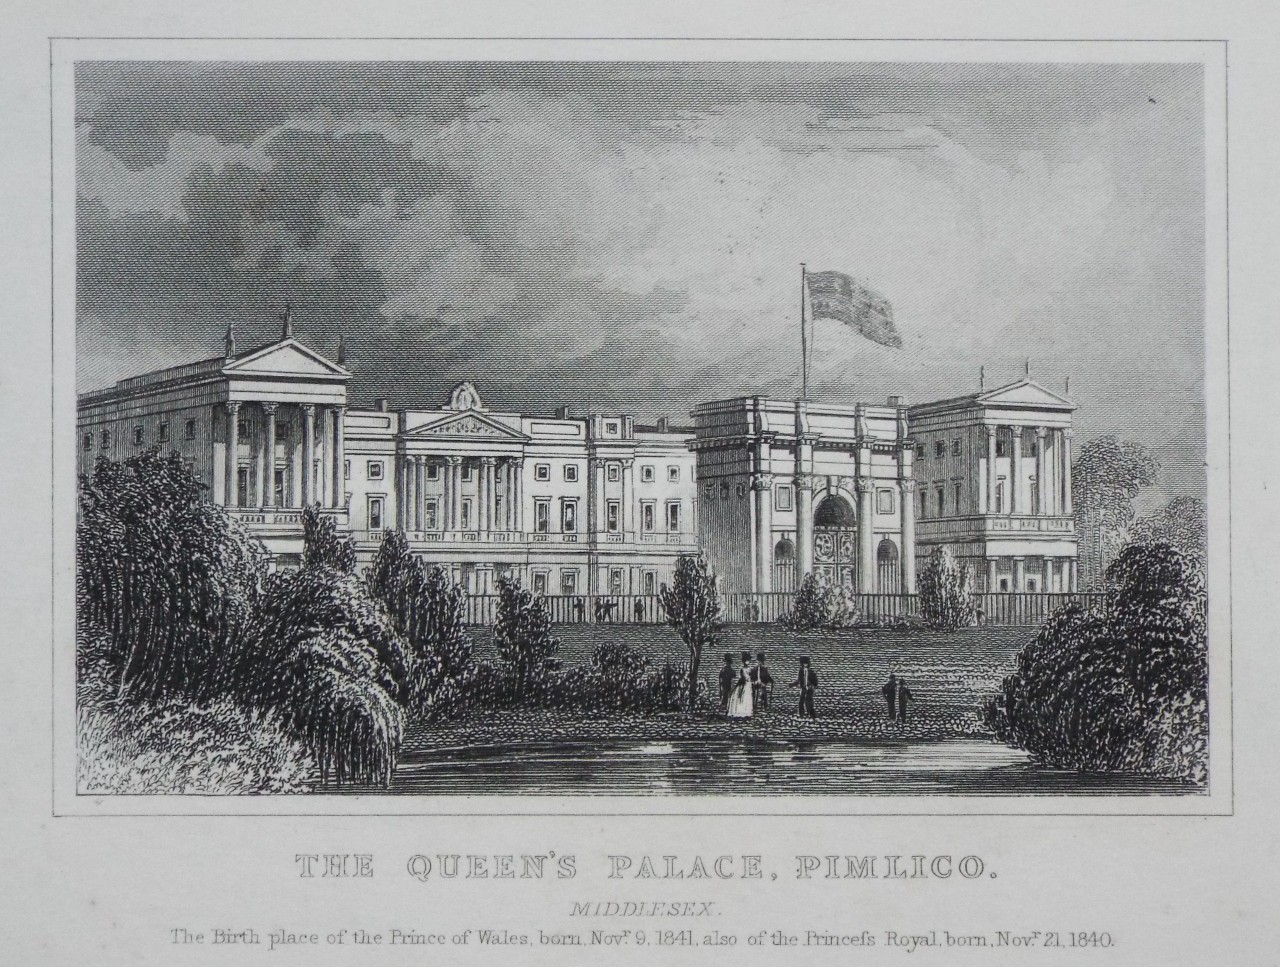 Print - The Queen's Palace, Pimlico. Middlesex. The Birth Place of the Prince of Wales, born Novr. 9. 1841. also of the Prinsess Royal, born Novr. 21. 1840.